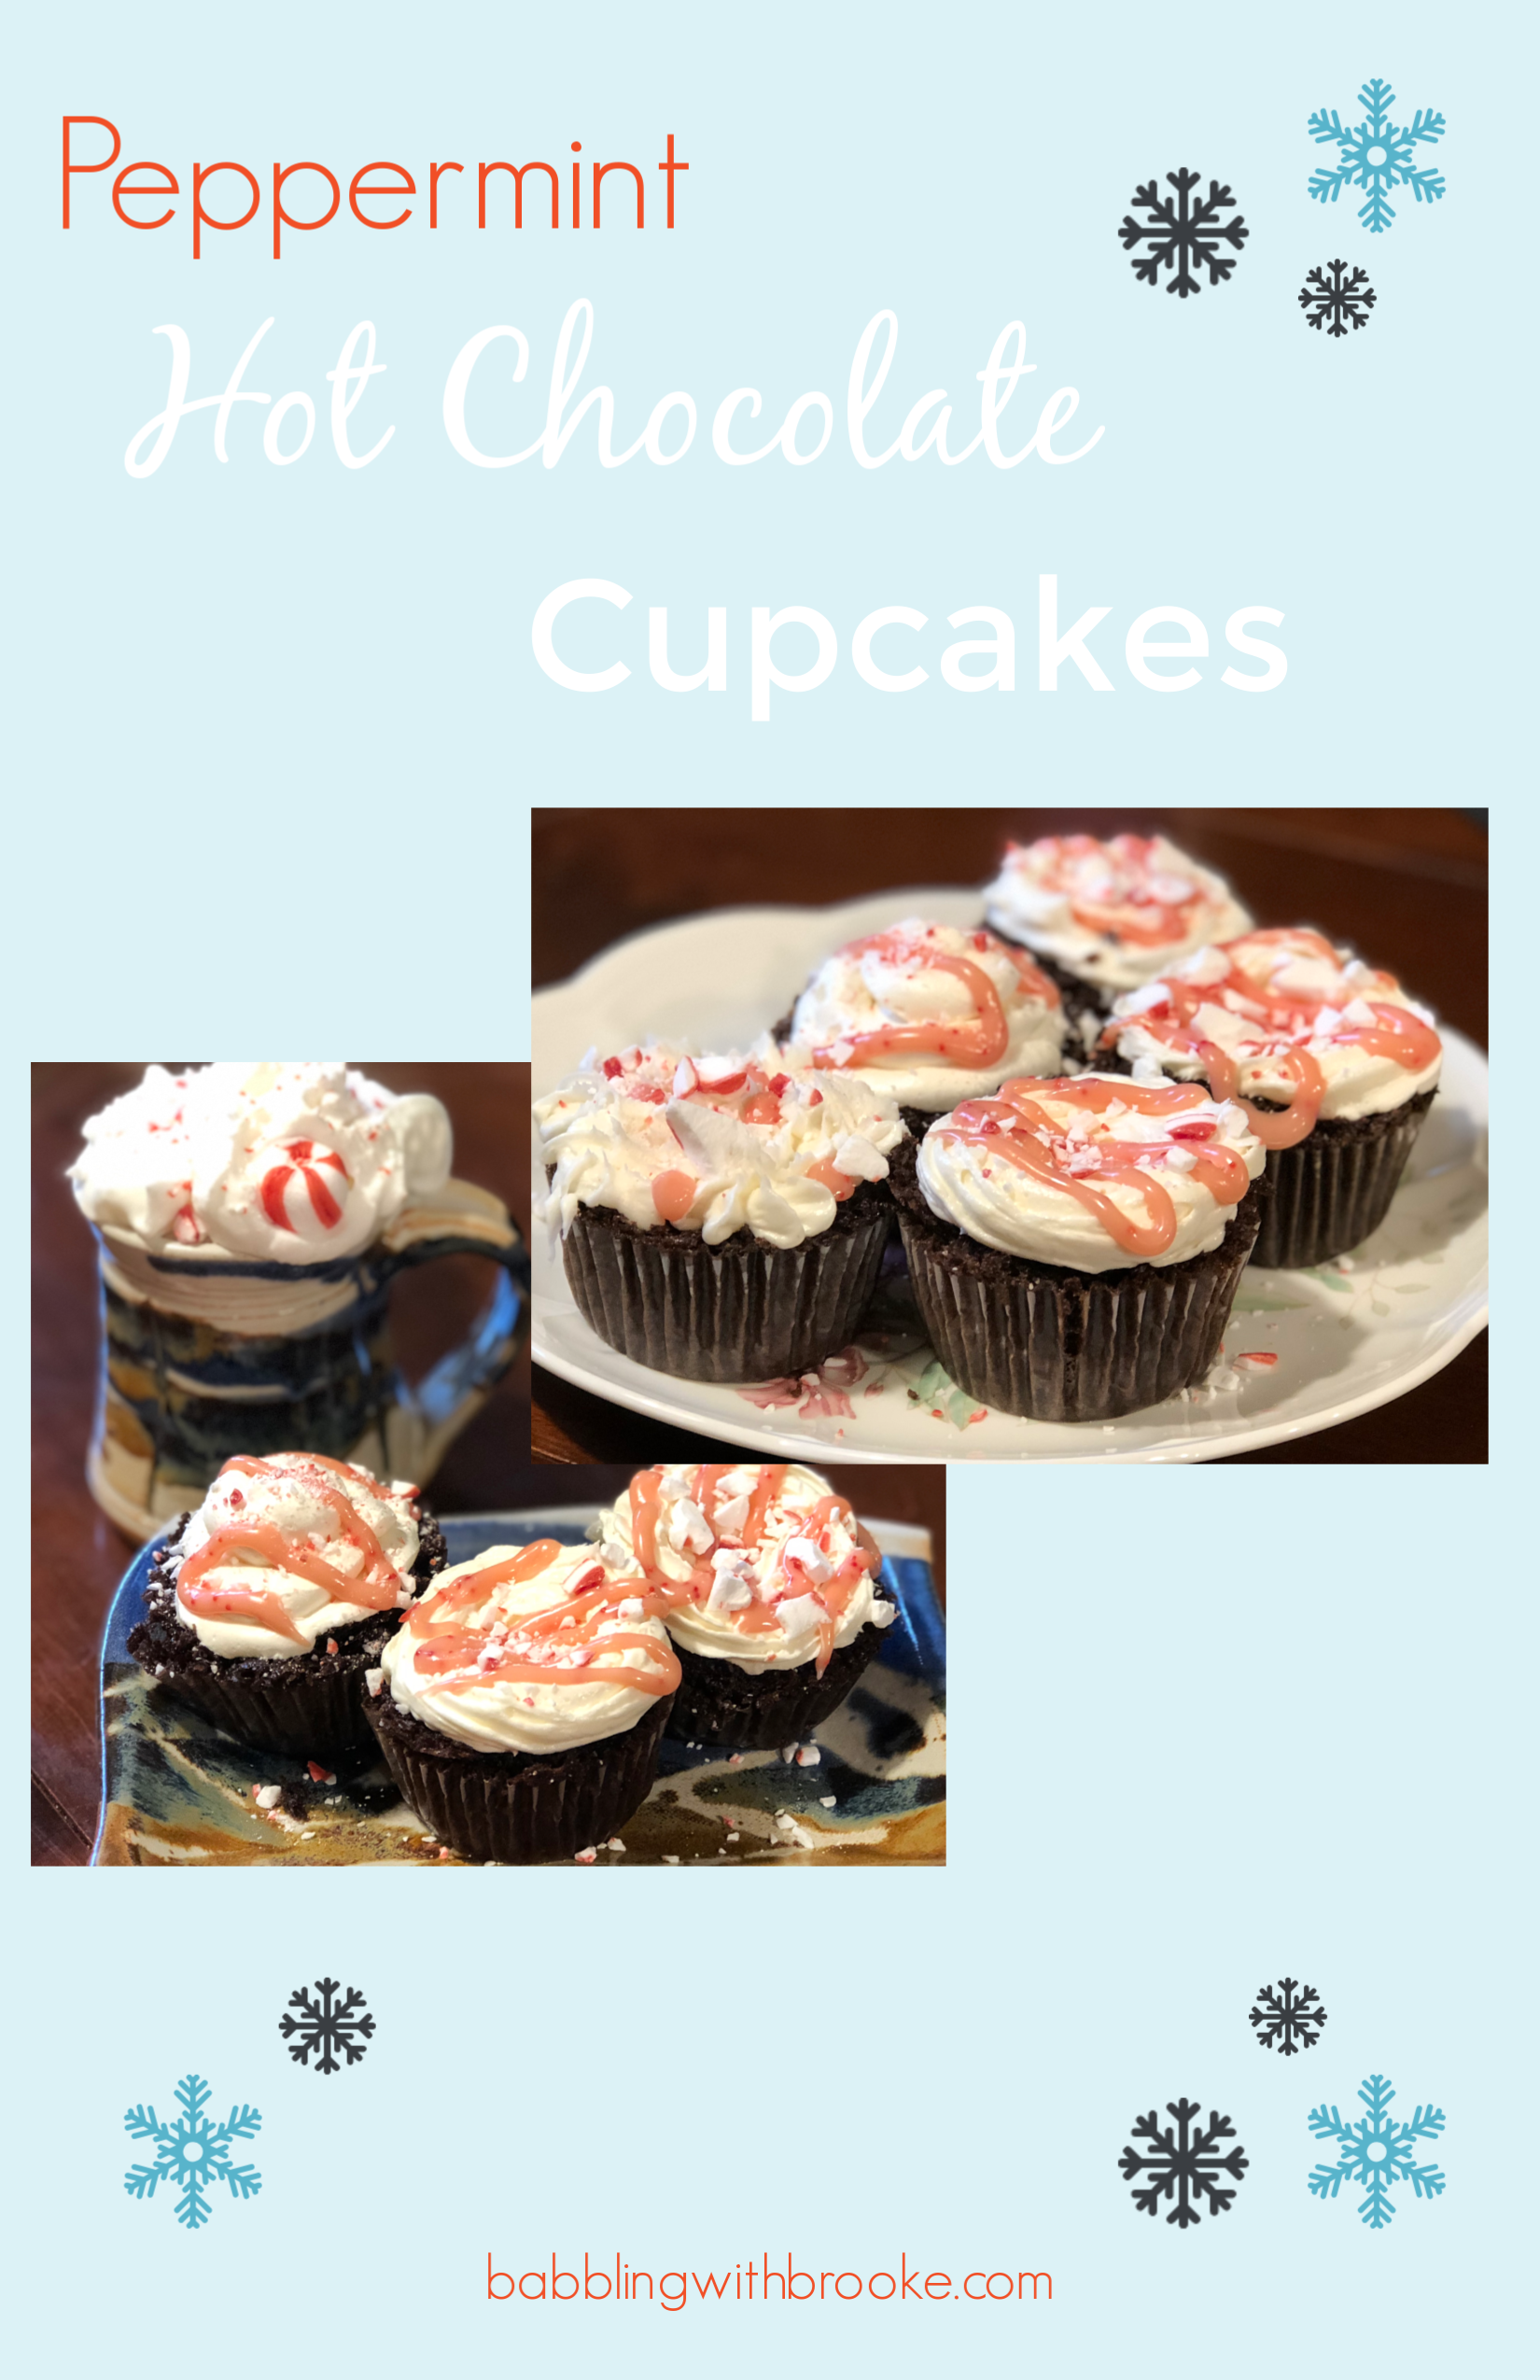 These delicious holiday cupcakes are sure to get you ready for Christmas time! Peppermint Hot Chocolate Cupcakes are perfect for gifting to others or for eating yourself and are lovely during the holiday season... or any season for that matter! #holidaycupcakes #cupcakes #specialtycupcakes #hotchocolate #peppermintcupcakes #hotchocolatecupcakes #holidaybaking